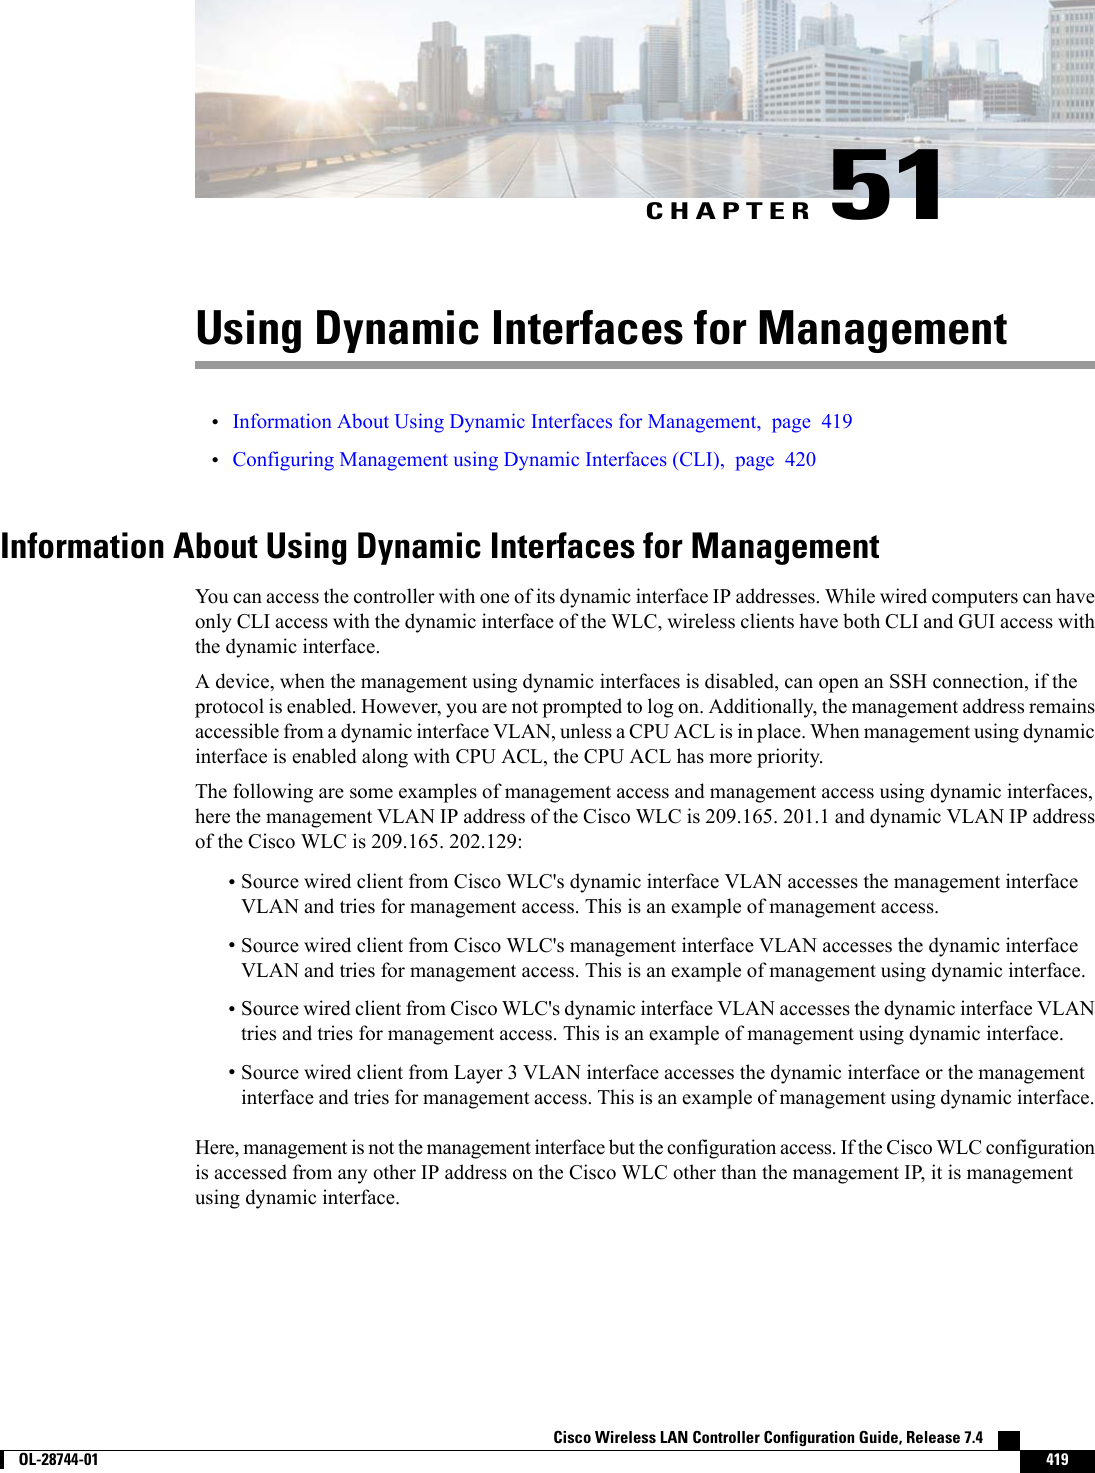 CHAPTER 51Using Dynamic Interfaces for Management•Information About Using Dynamic Interfaces for Management, page 419•Configuring Management using Dynamic Interfaces (CLI), page 420Information About Using Dynamic Interfaces for ManagementYou can access the controller with one of its dynamic interface IP addresses. While wired computers can haveonly CLI access with the dynamic interface of the WLC, wireless clients have both CLI and GUI access withthe dynamic interface.A device, when the management using dynamic interfaces is disabled, can open an SSH connection, if theprotocol is enabled. However, you are not prompted to log on. Additionally, the management address remainsaccessible from a dynamic interface VLAN, unless a CPU ACL is in place. When management using dynamicinterface is enabled along with CPU ACL, the CPU ACL has more priority.The following are some examples of management access and management access using dynamic interfaces,here the management VLAN IP address of the Cisco WLC is 209.165. 201.1 and dynamic VLAN IP addressof the Cisco WLC is 209.165. 202.129:•Source wired client from Cisco WLC&apos;s dynamic interface VLAN accesses the management interfaceVLAN and tries for management access. This is an example of management access.•Source wired client from Cisco WLC&apos;s management interface VLAN accesses the dynamic interfaceVLAN and tries for management access. This is an example of management using dynamic interface.•Source wired client from Cisco WLC&apos;s dynamic interface VLAN accesses the dynamic interface VLANtries and tries for management access. This is an example of management using dynamic interface.•Source wired client from Layer 3 VLAN interface accesses the dynamic interface or the managementinterface and tries for management access. This is an example of management using dynamic interface.Here, management is not the management interface but the configuration access. If the Cisco WLC configurationis accessed from any other IP address on the Cisco WLC other than the management IP, it is managementusing dynamic interface.Cisco Wireless LAN Controller Configuration Guide, Release 7.4        OL-28744-01 419